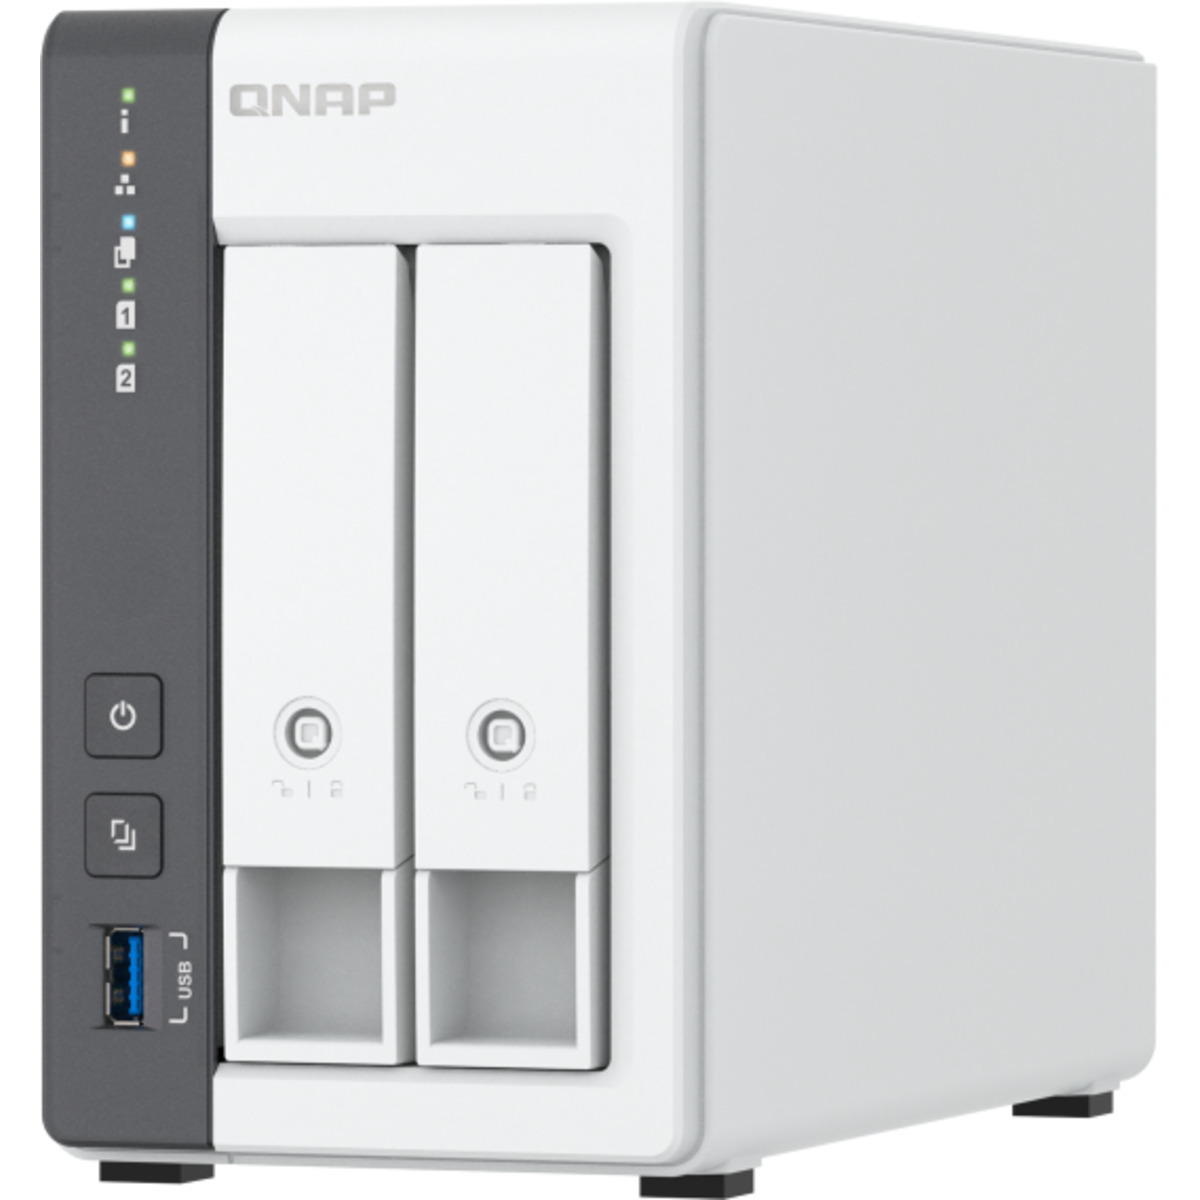 QNAP TS-216G 4tb 2-Bay Desktop Personal / Basic Home / Small Office NAS - Network Attached Storage Device 2x2tb Samsung 870 EVO MZ-77E2T0BAM 2.5 560/530MB/s SATA 6Gb/s SSD CONSUMER Class Drives Installed - Burn-In Tested TS-216G